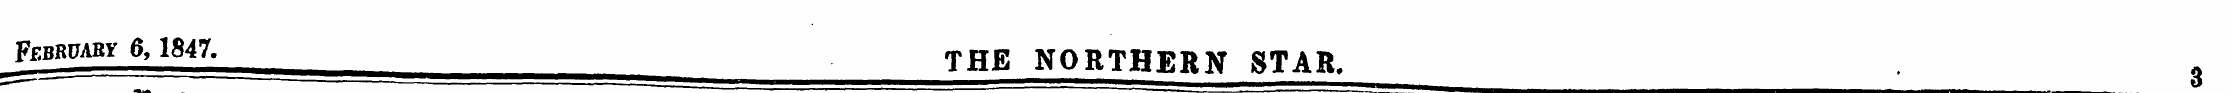 February 6,1847. THE NORTHERN STAR. 0